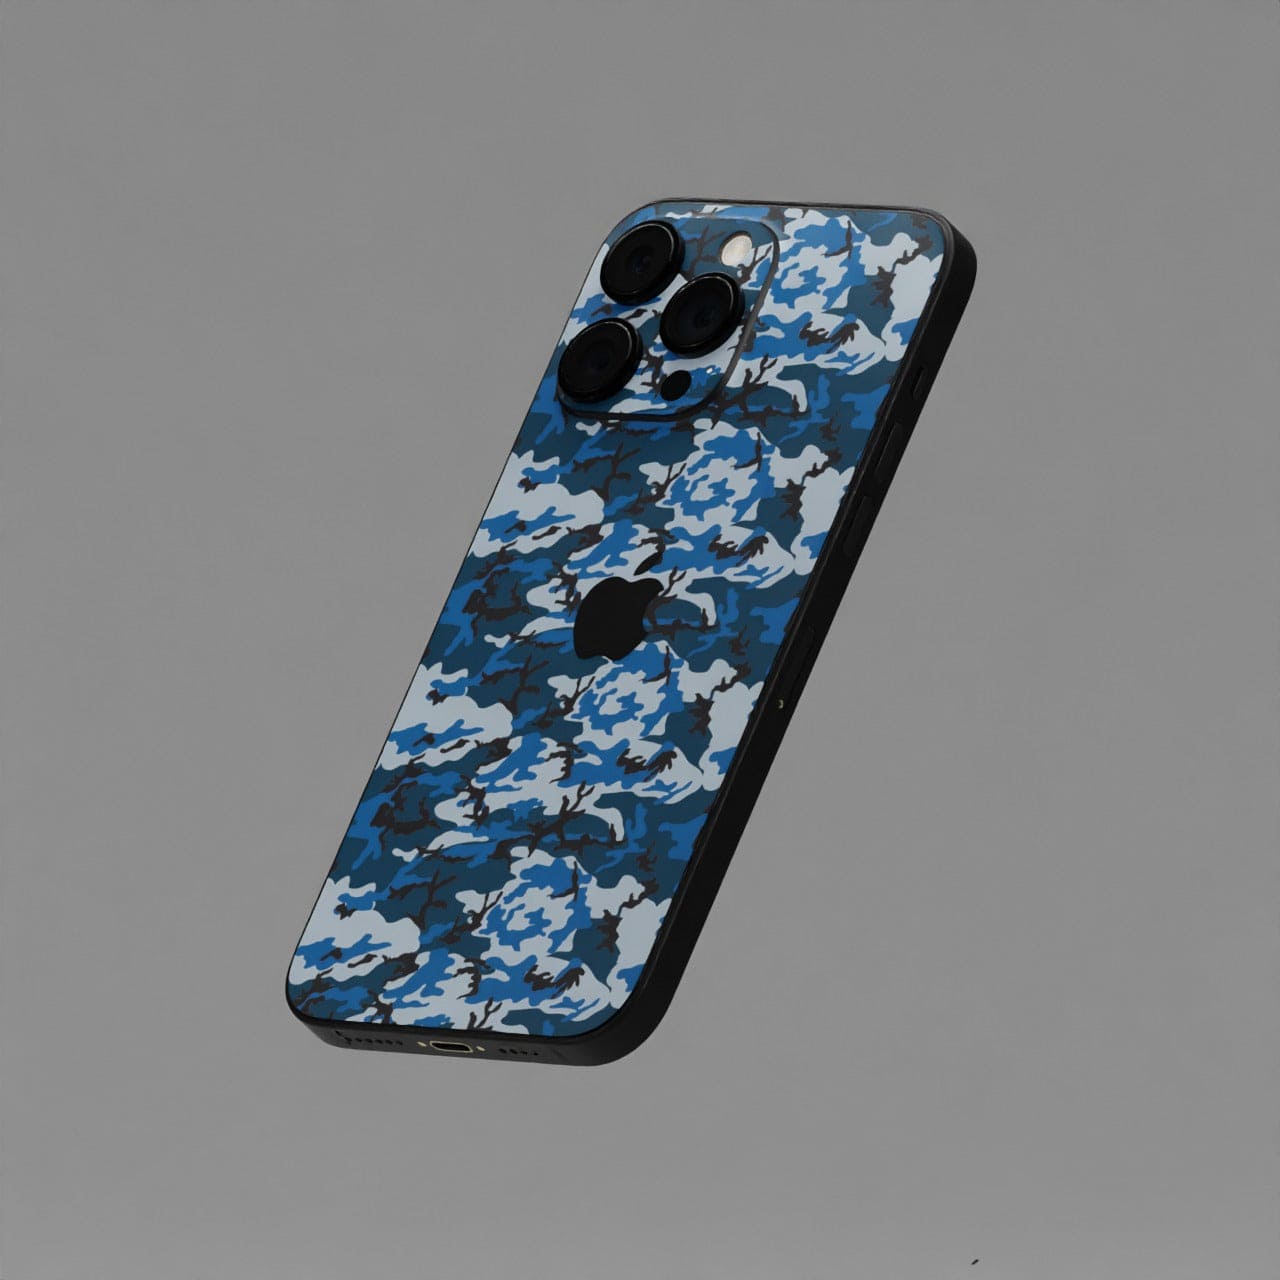 Blue Camouflage Mobile Skins & Wraps